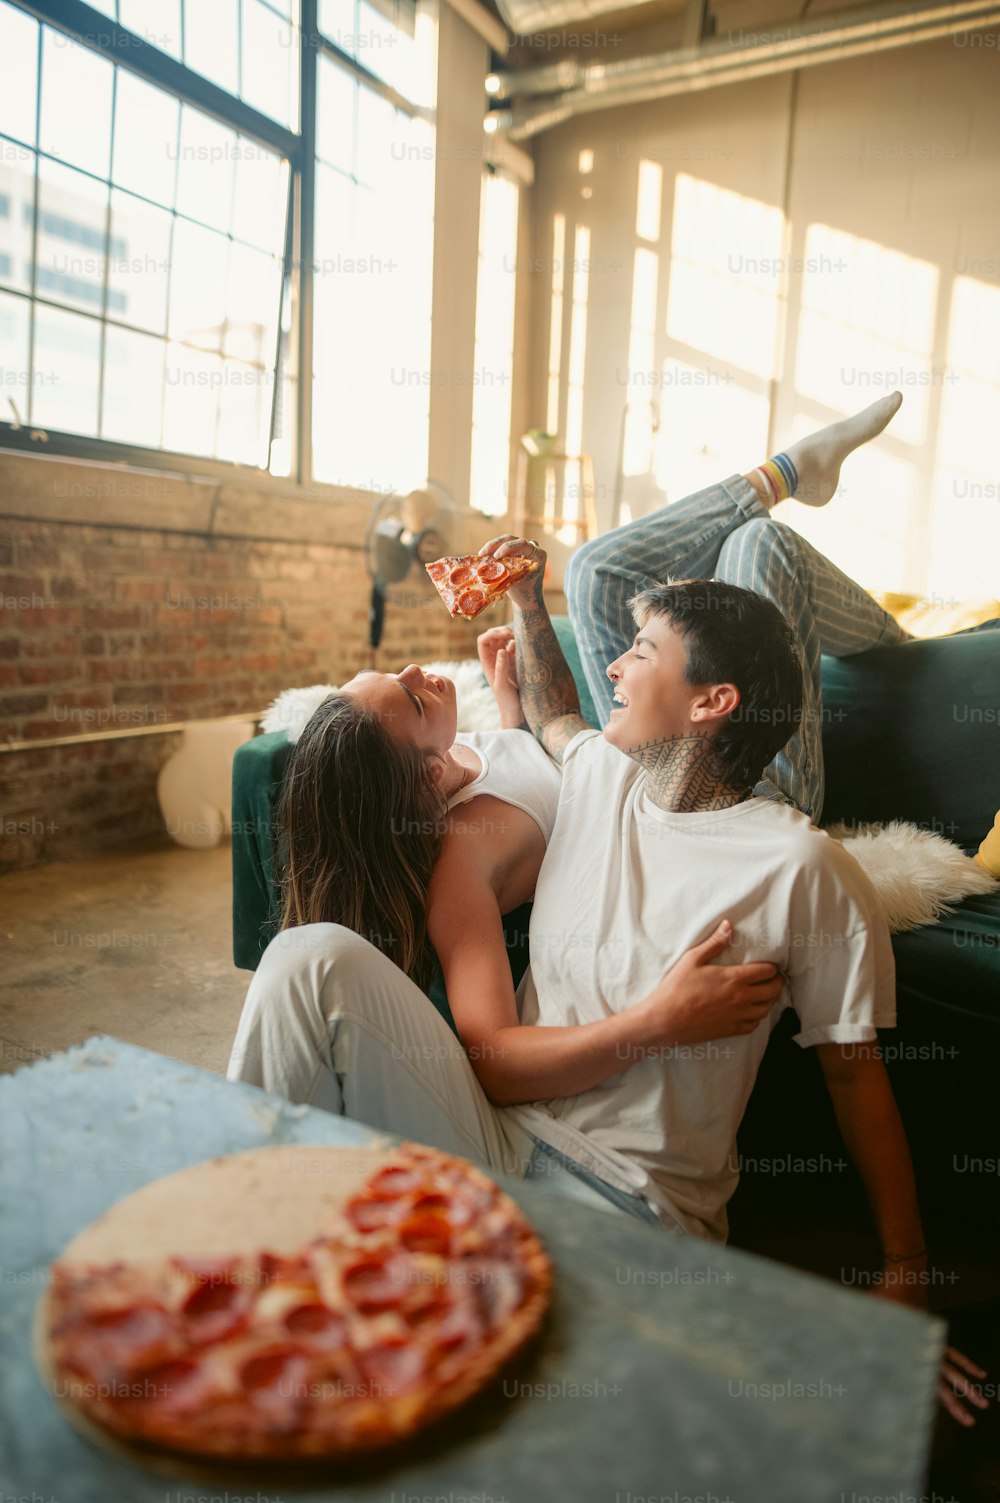 a man and a woman sitting on a couch eating pizza